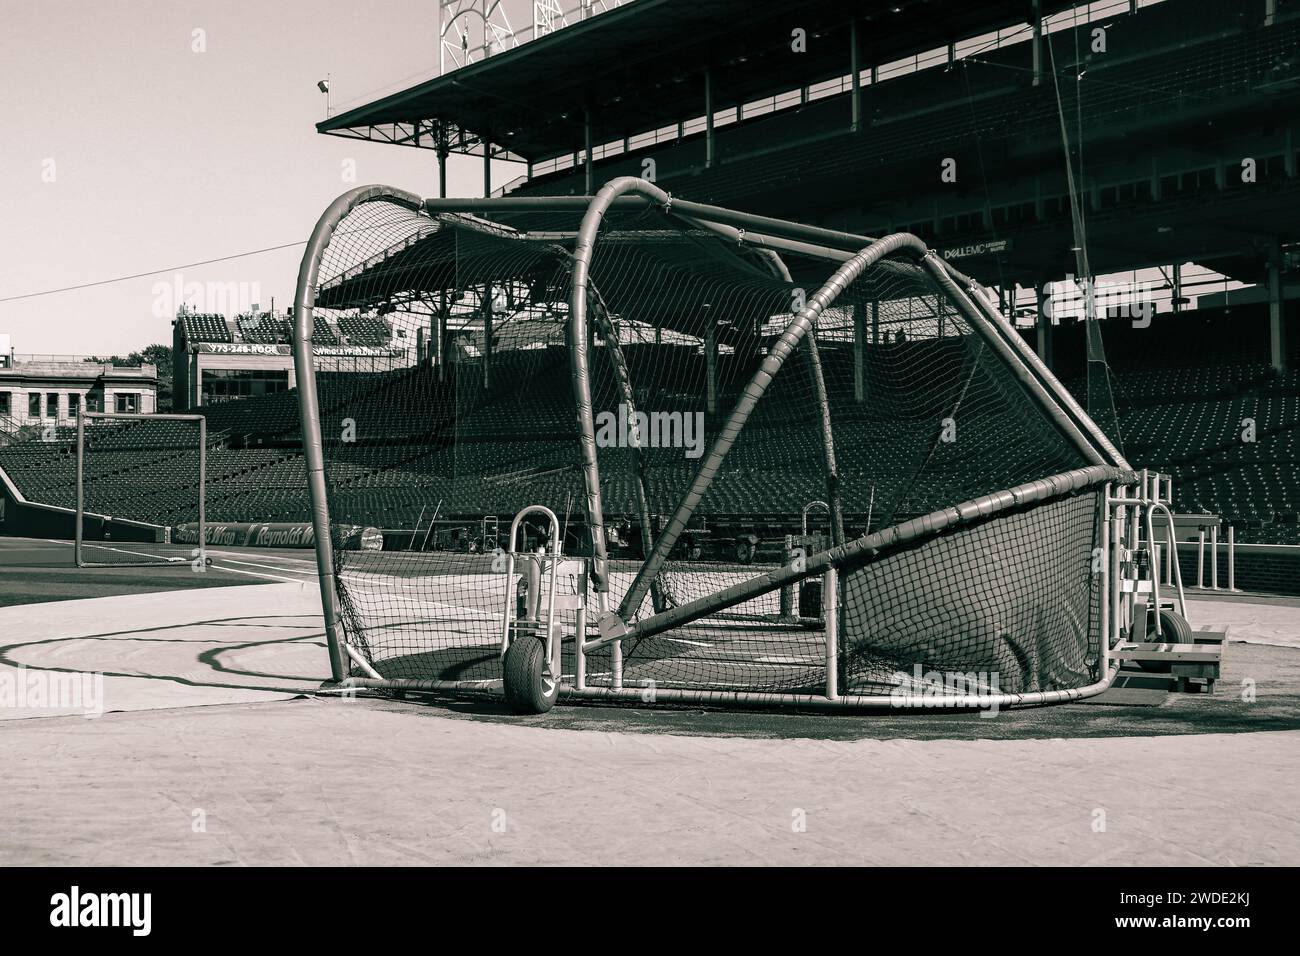 Batting cage on an empty Wrigley field in black and white Stock Photo